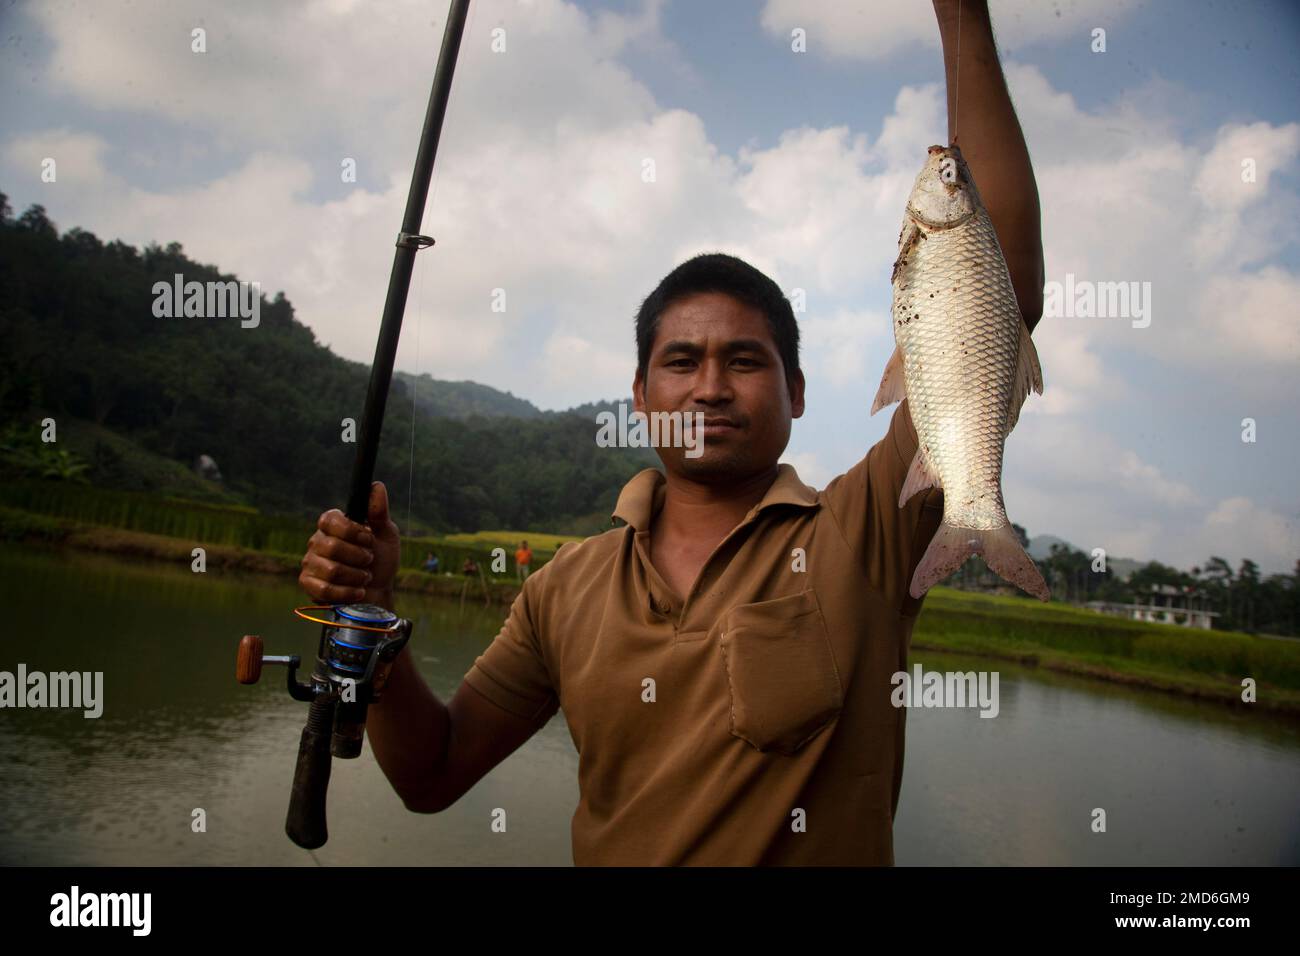 A Khasi tribal man shows his catch after fishing in a pond in